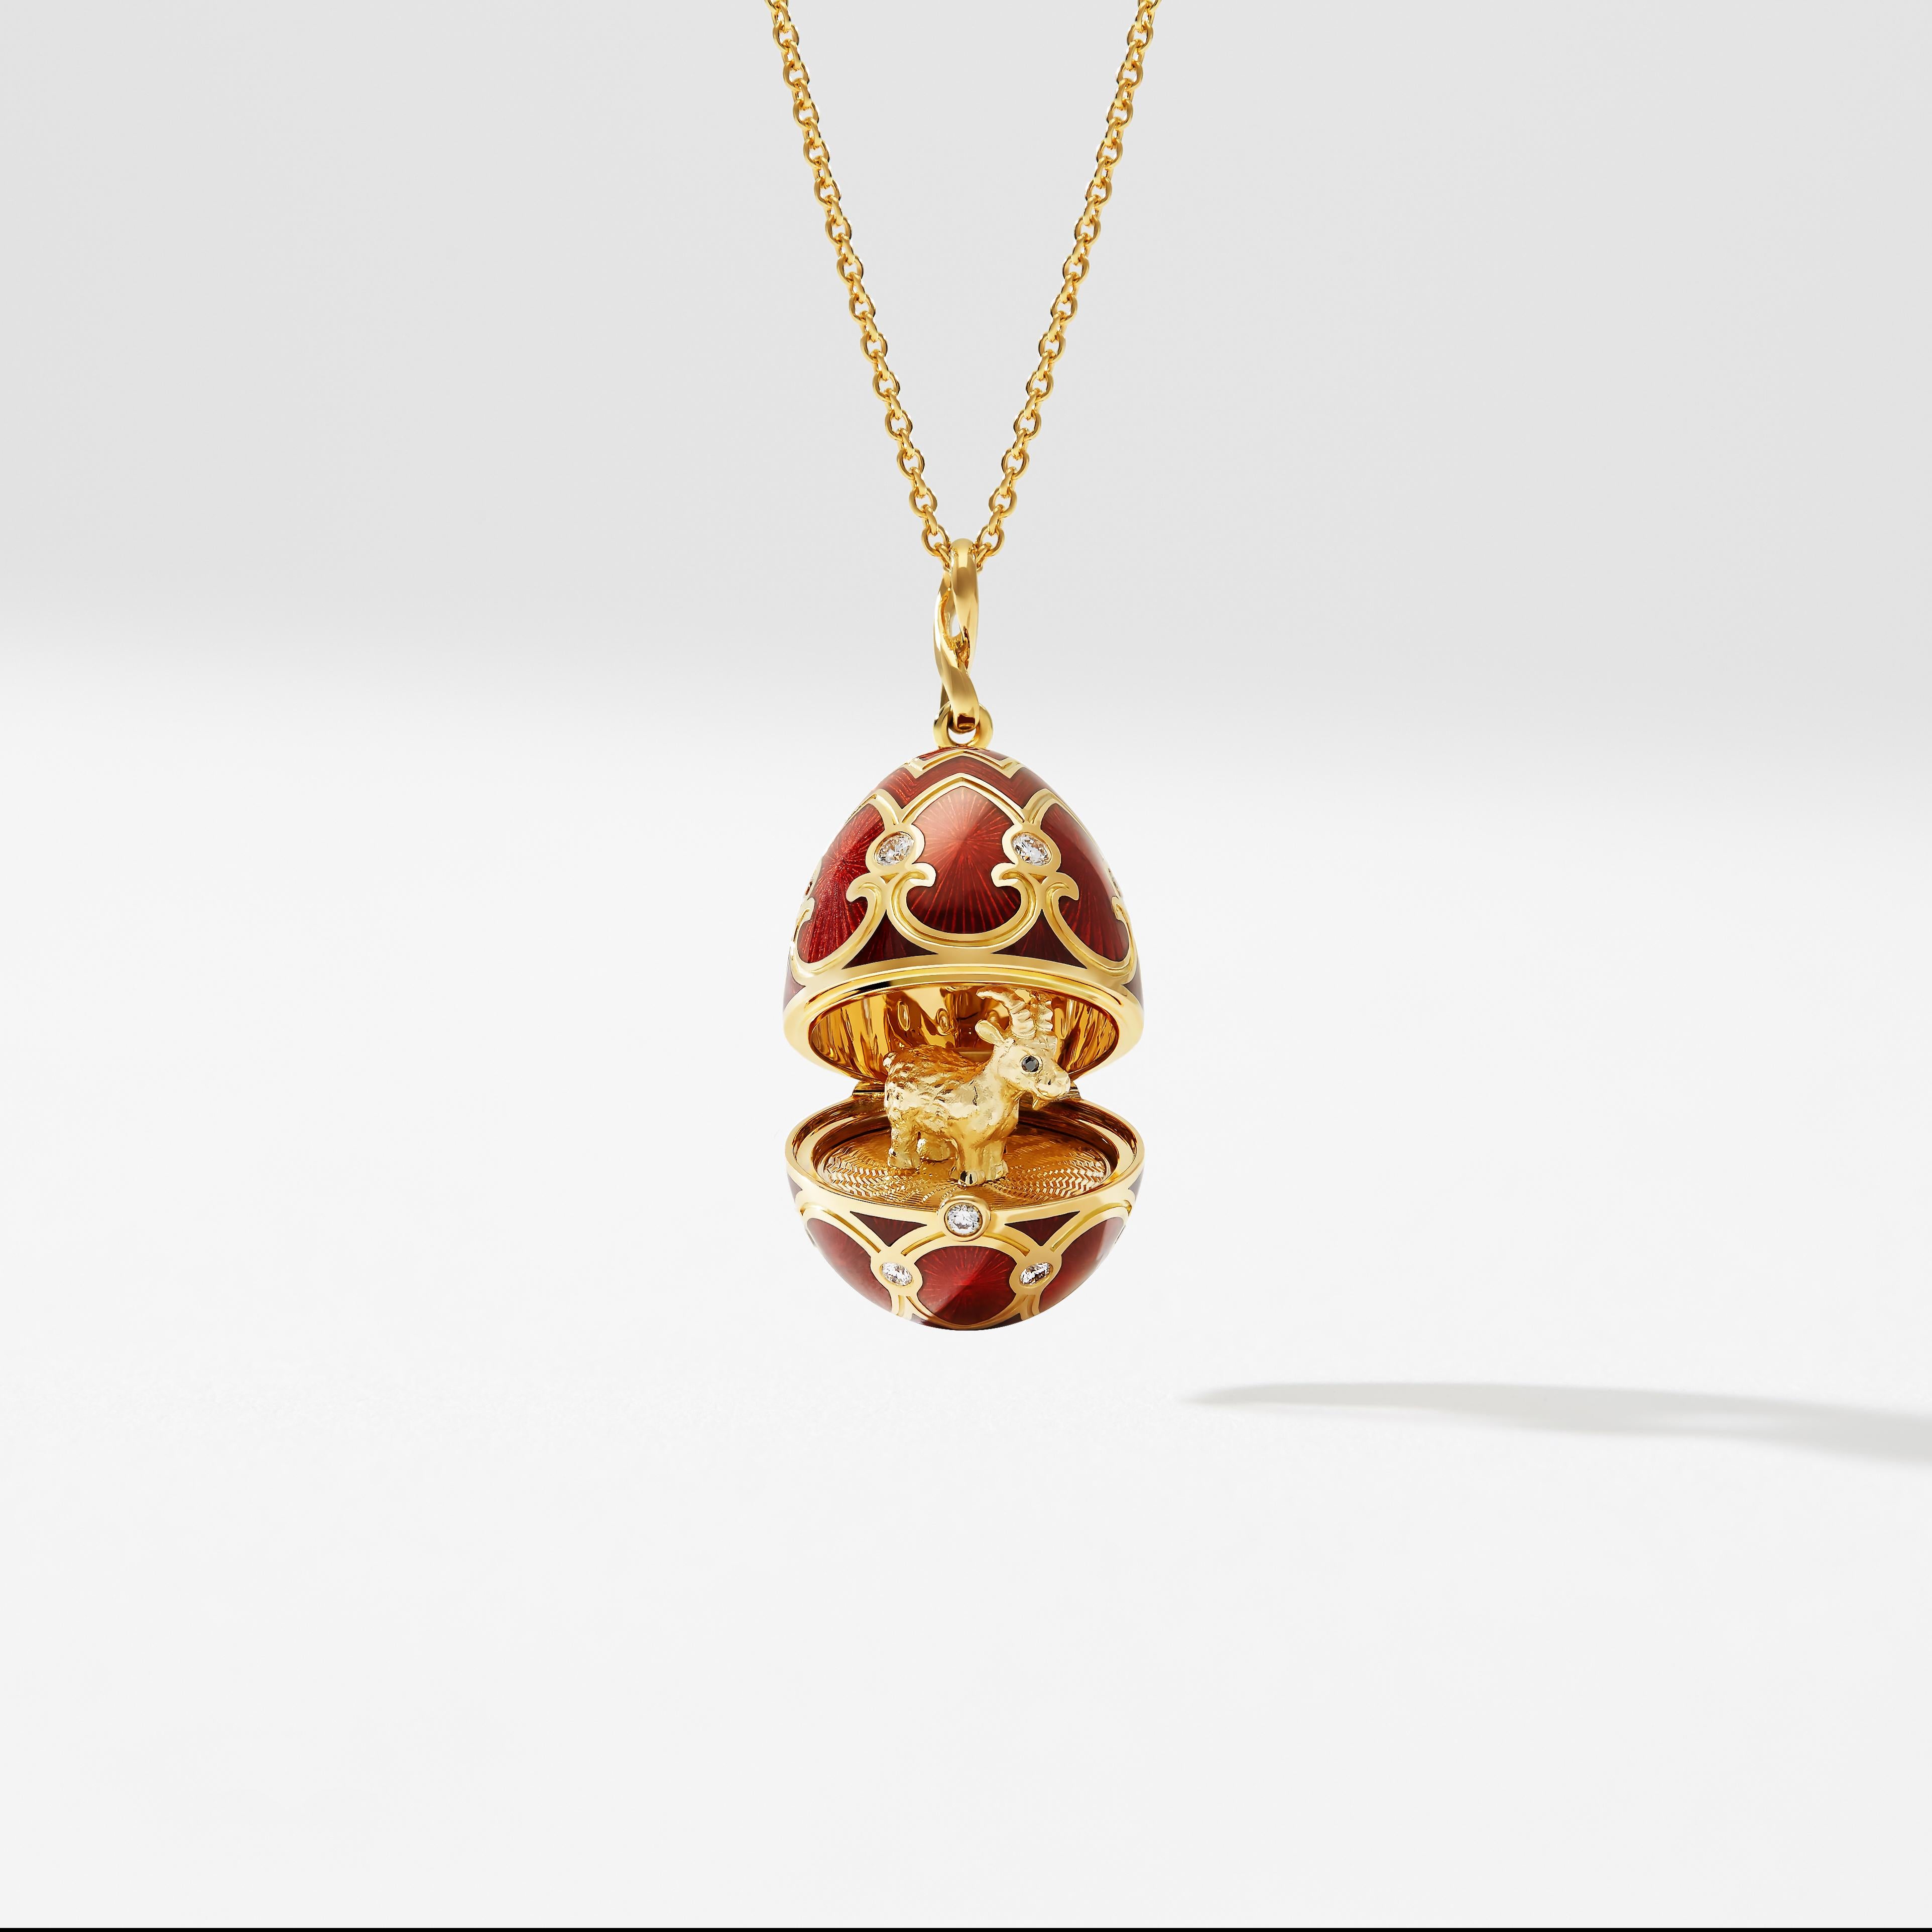 The Heritage Yellow Gold Diamond & Red Guilloché Enamel Year Of The Goat Surprise Locket features red guilloché enamel and round white diamonds, set in 18 karat yellow gold. The locket opens to reveal an 18 karat yellow gold goat with ruby set eyes,